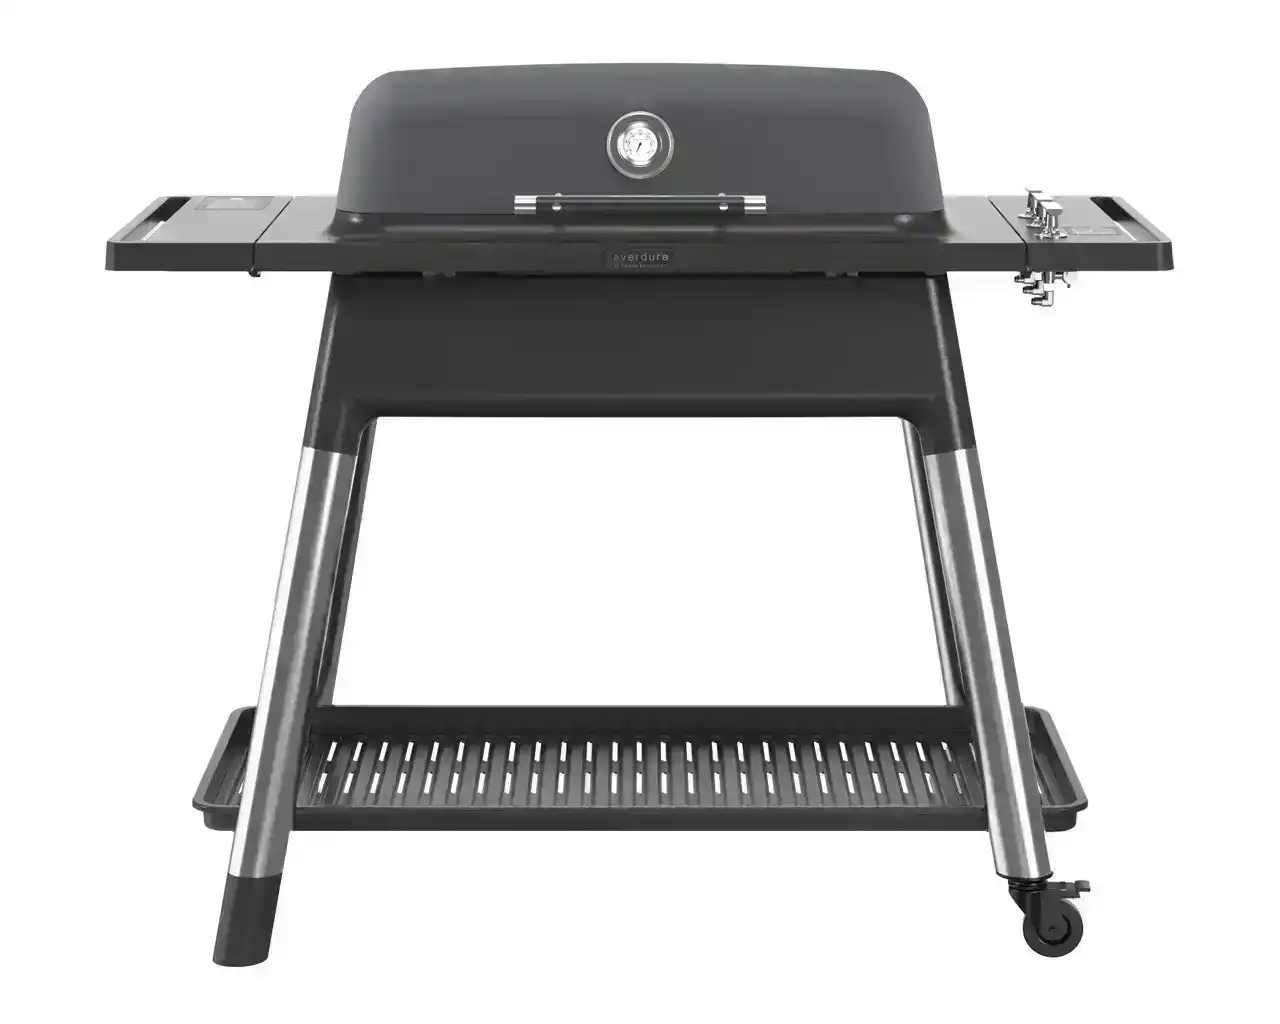 Everdure by Heston Blumenthal FURNACE 3 Burner BBQ with Stand (Matte Grey)